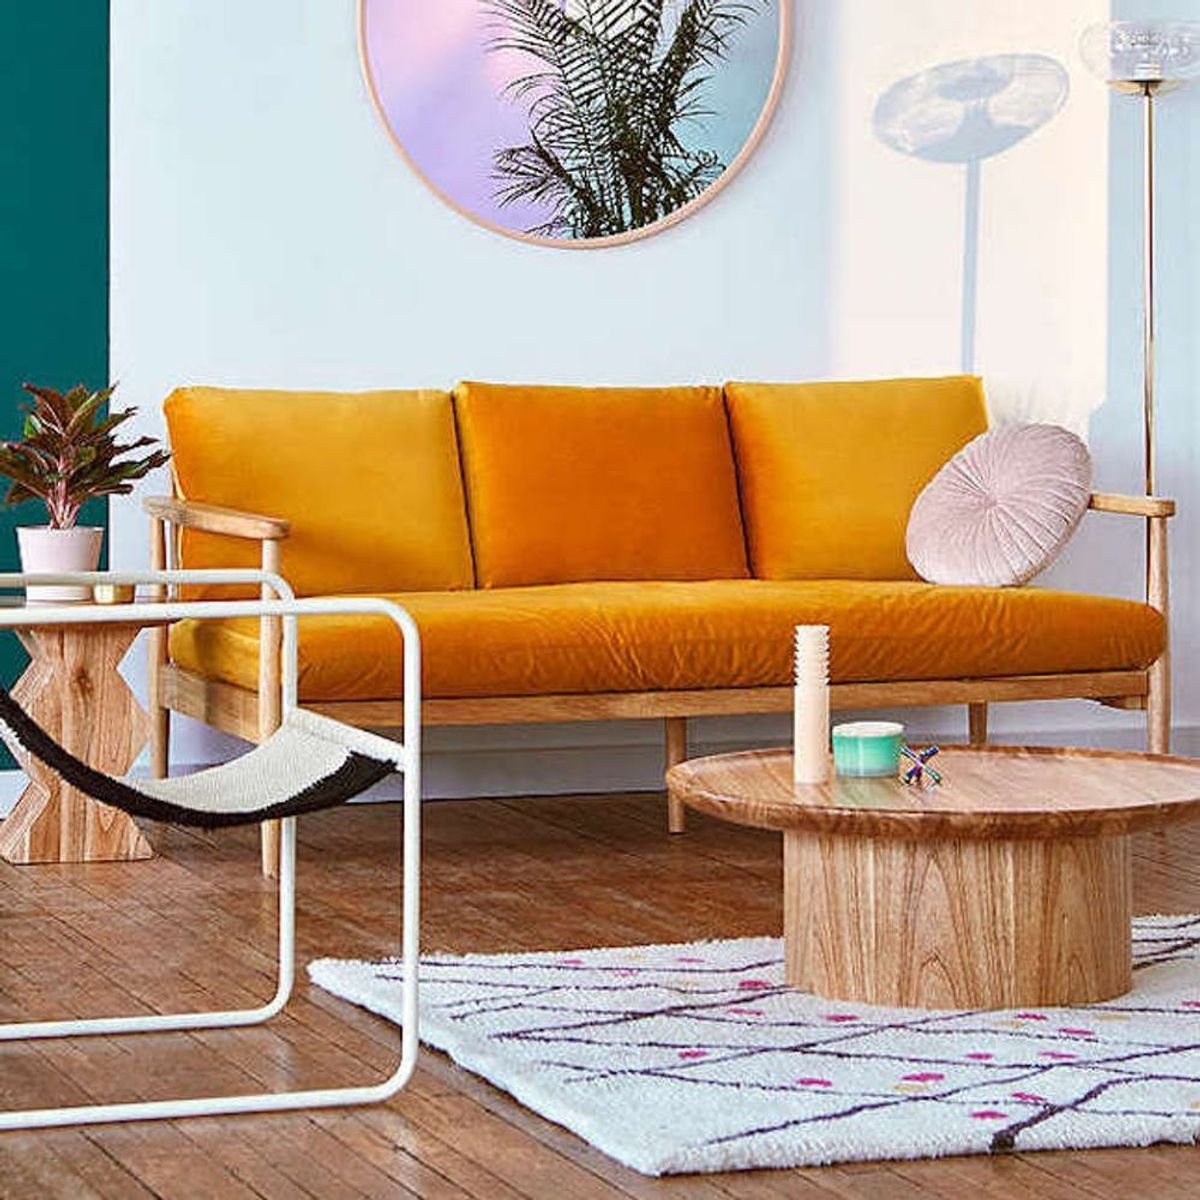 16 Ways to Incorporate Pantone’s “Resourceful” Palette into Your Home